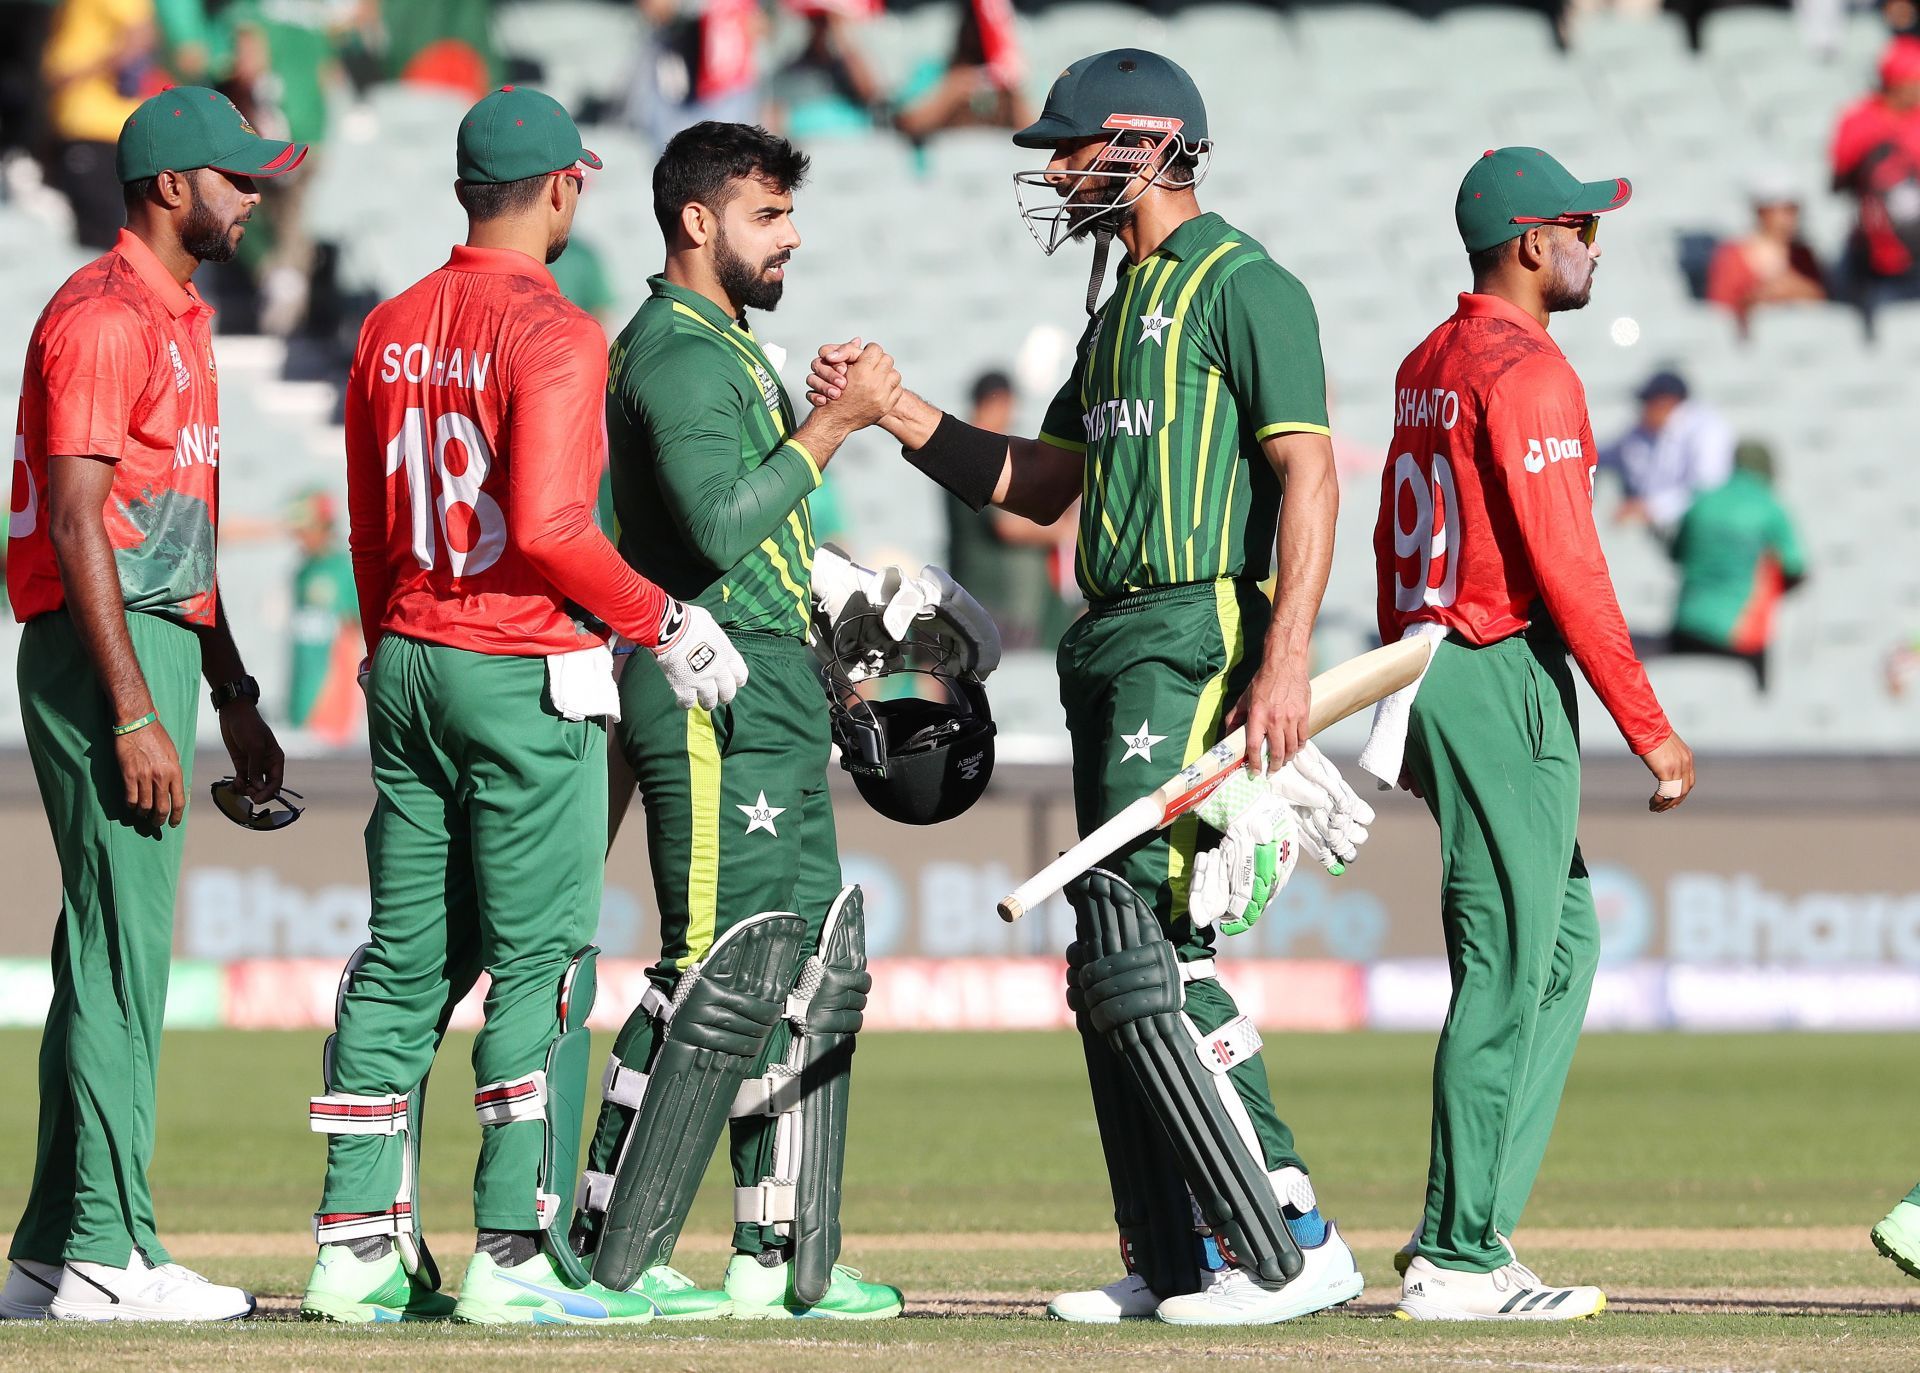 Pakistan defeated Bangladesh to make it through to the semi-finals of the T20 World Cup.